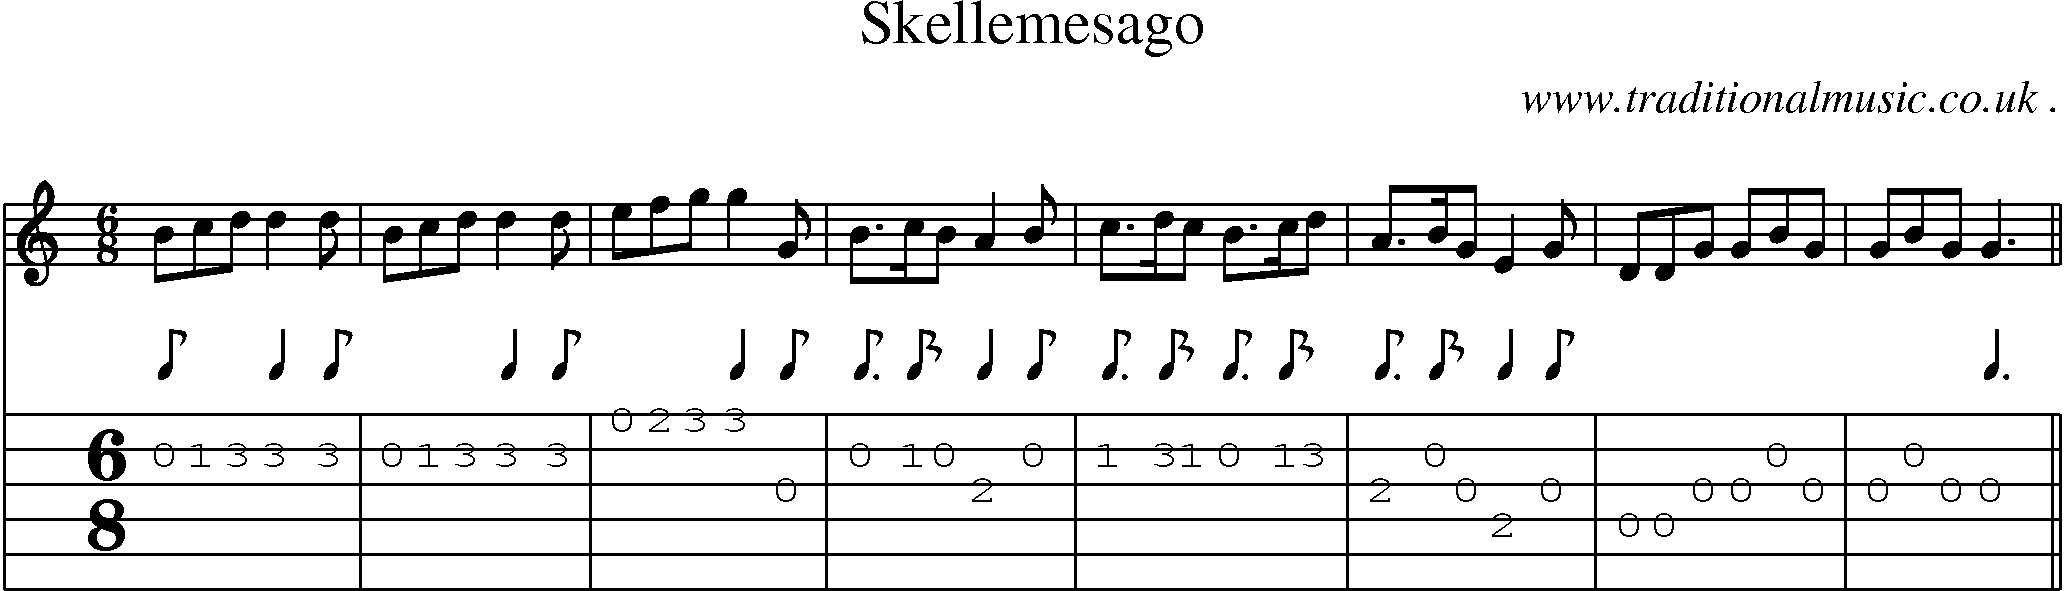 Sheet-Music and Guitar Tabs for Skellemesago